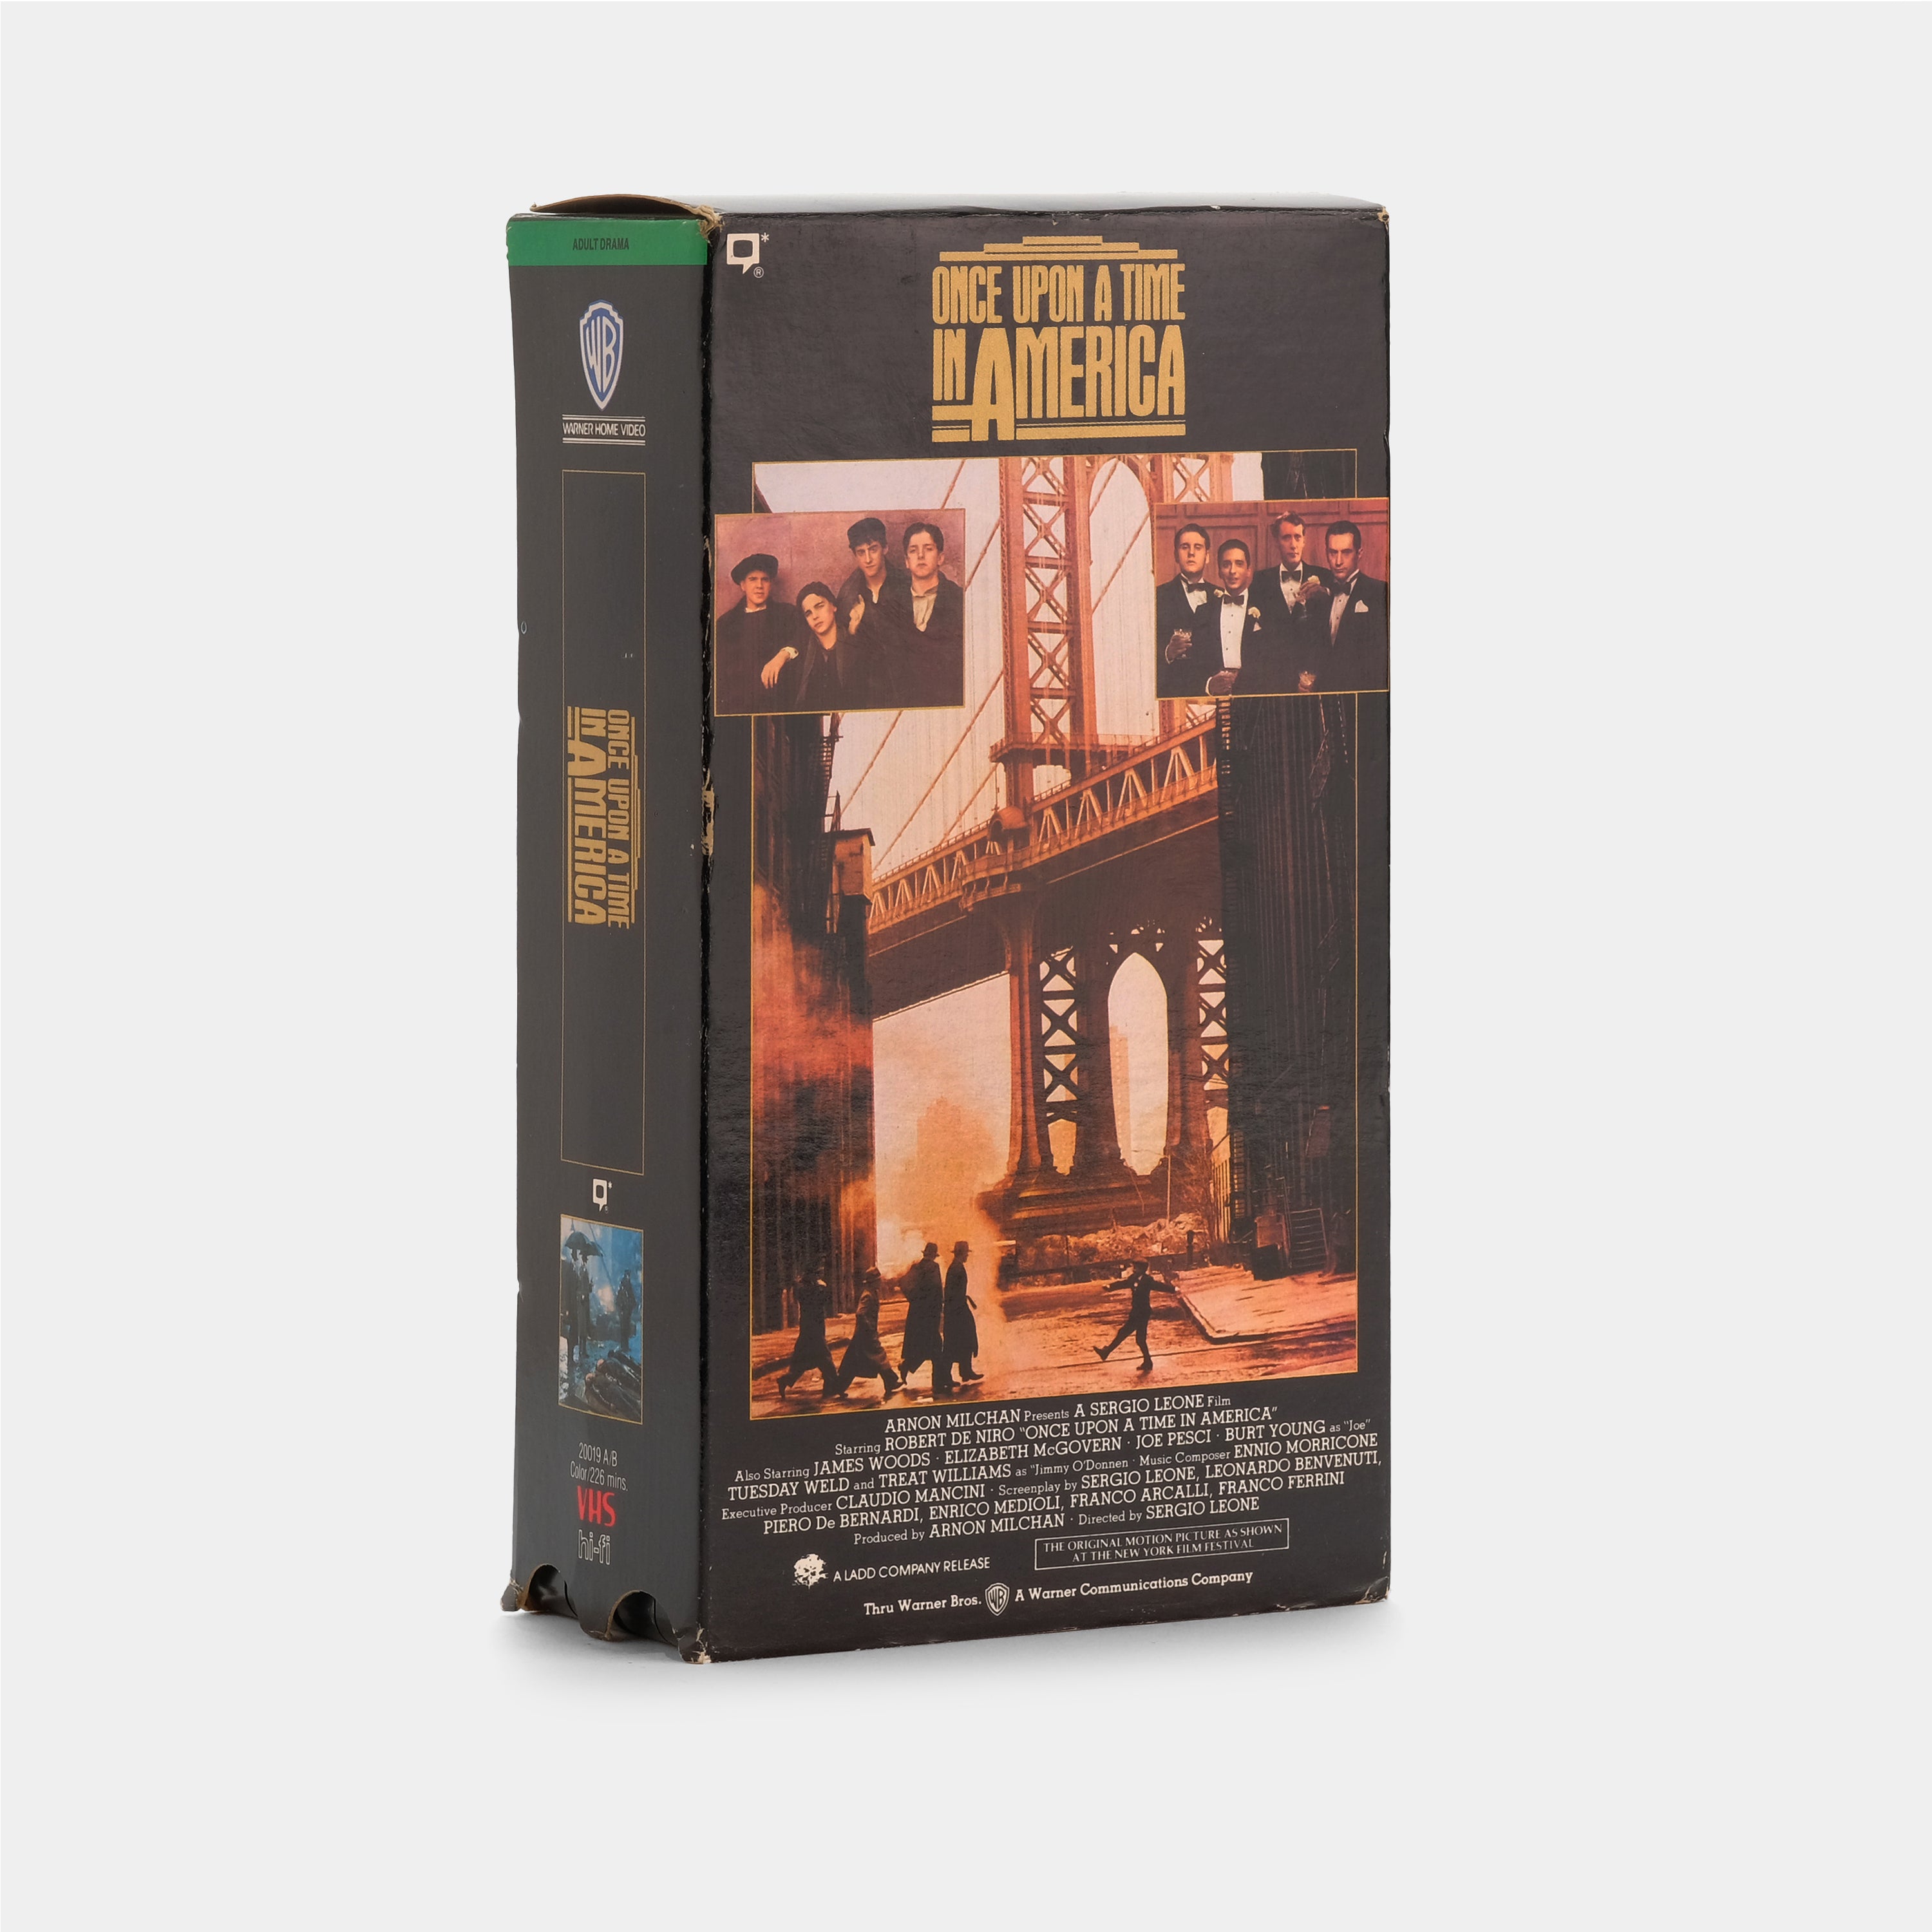 Once Upon a Time in America VHS Tapes